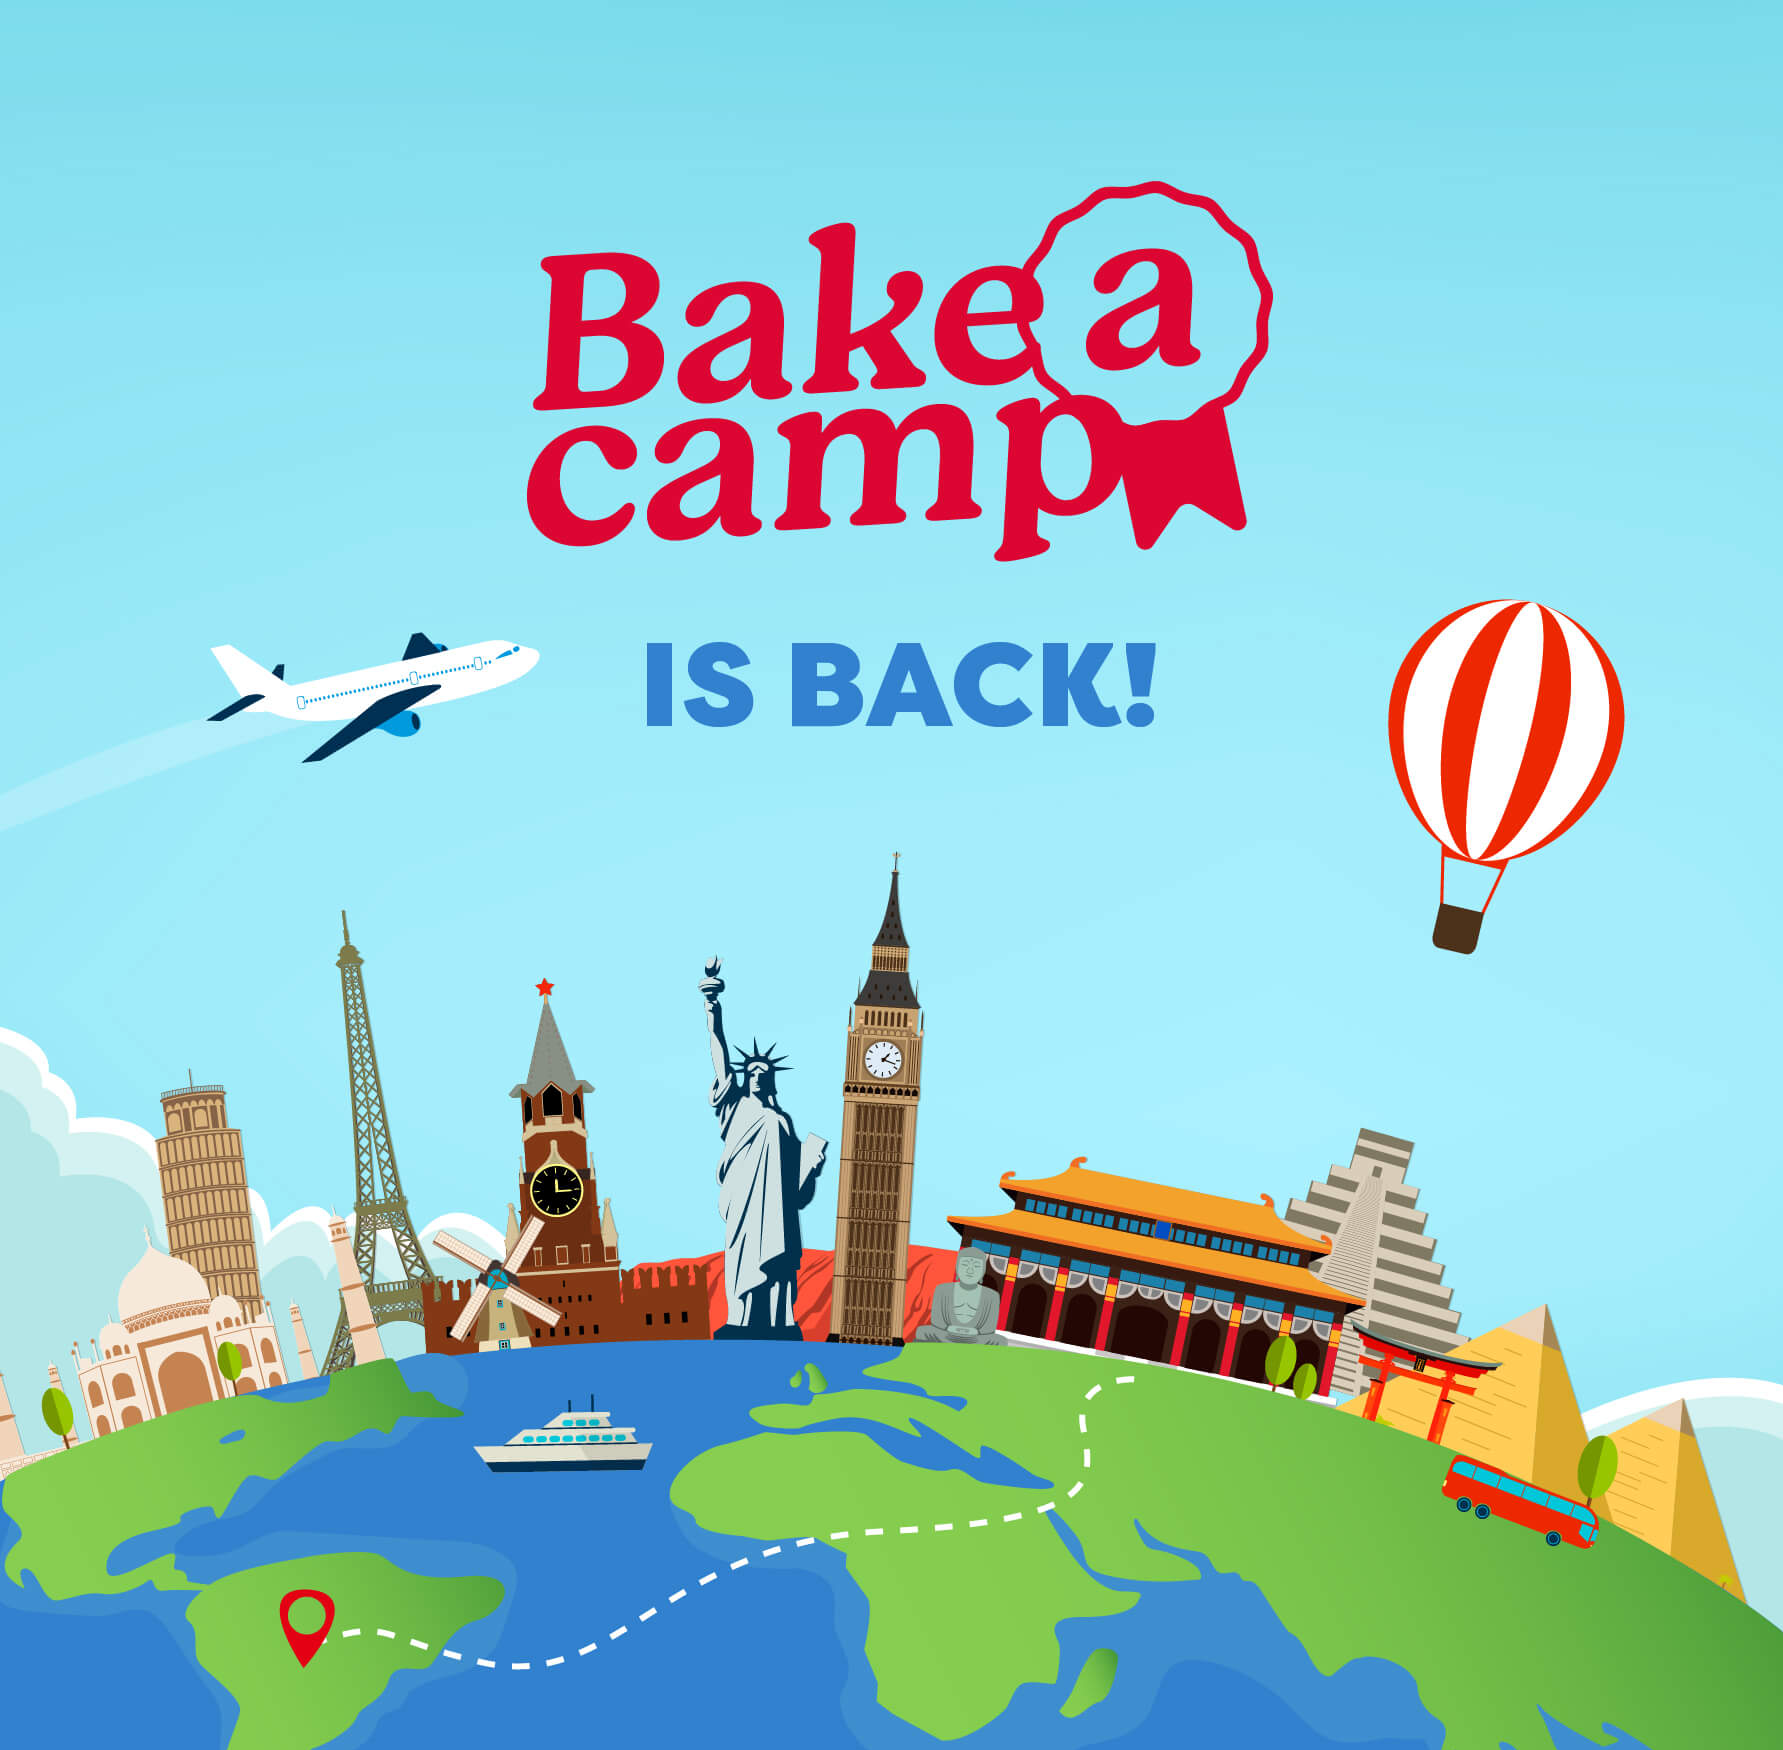 Baketivity Summer 2020 Bake-A-Camp Limited Edition Baking Kit Available Now  + Coupon! - Hello Subscription